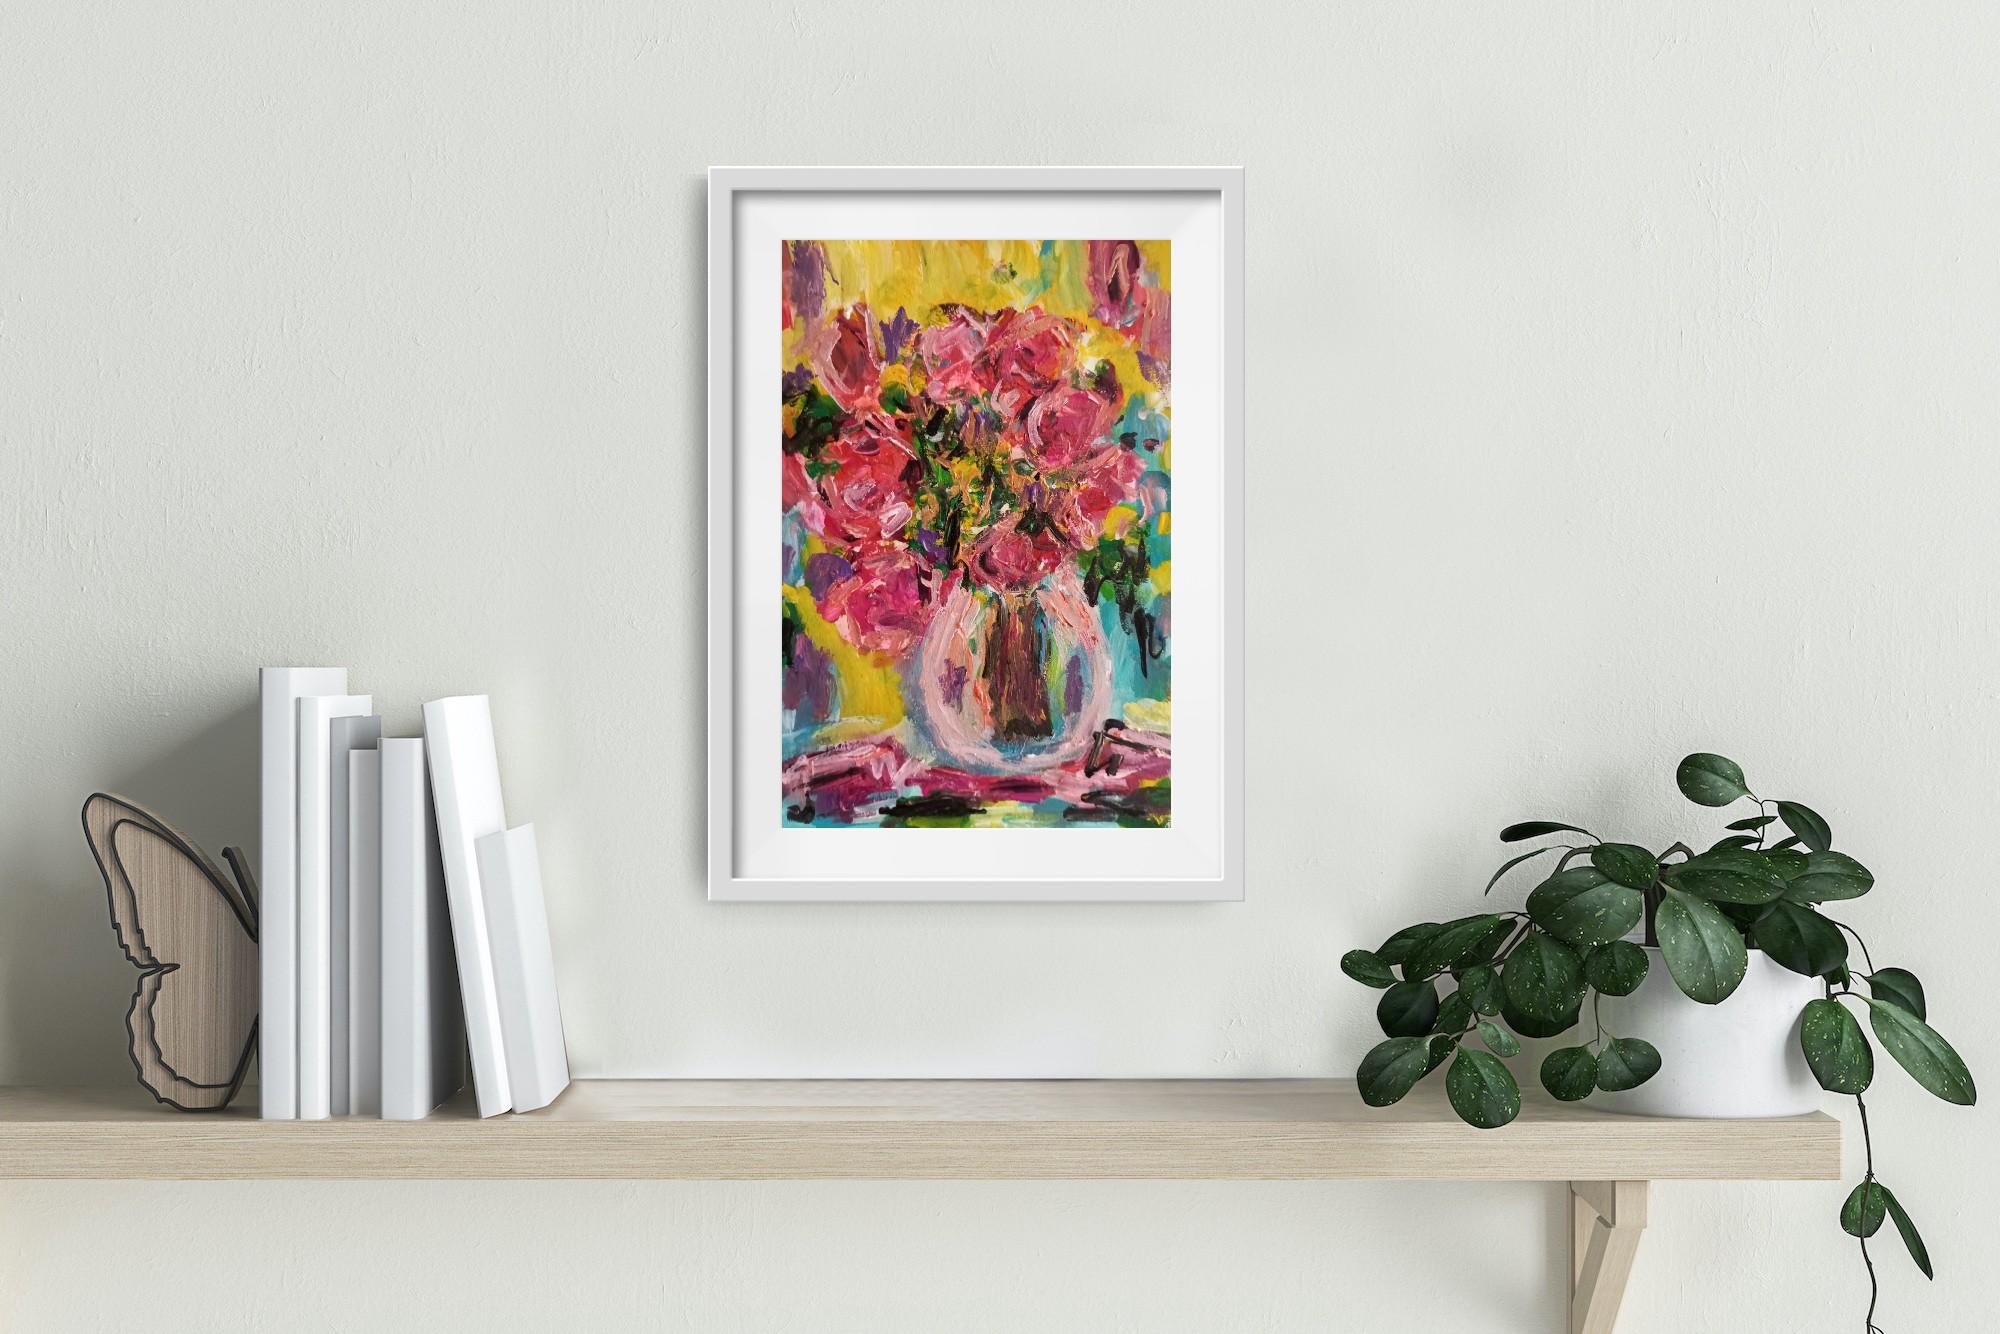 
This floral artwork made in a modern impressionist style with a touch of expressionism. Floral artworks allow me to experience the world of nature through the bright colors of a summer period.

While painting, I sought to capture the beauty of